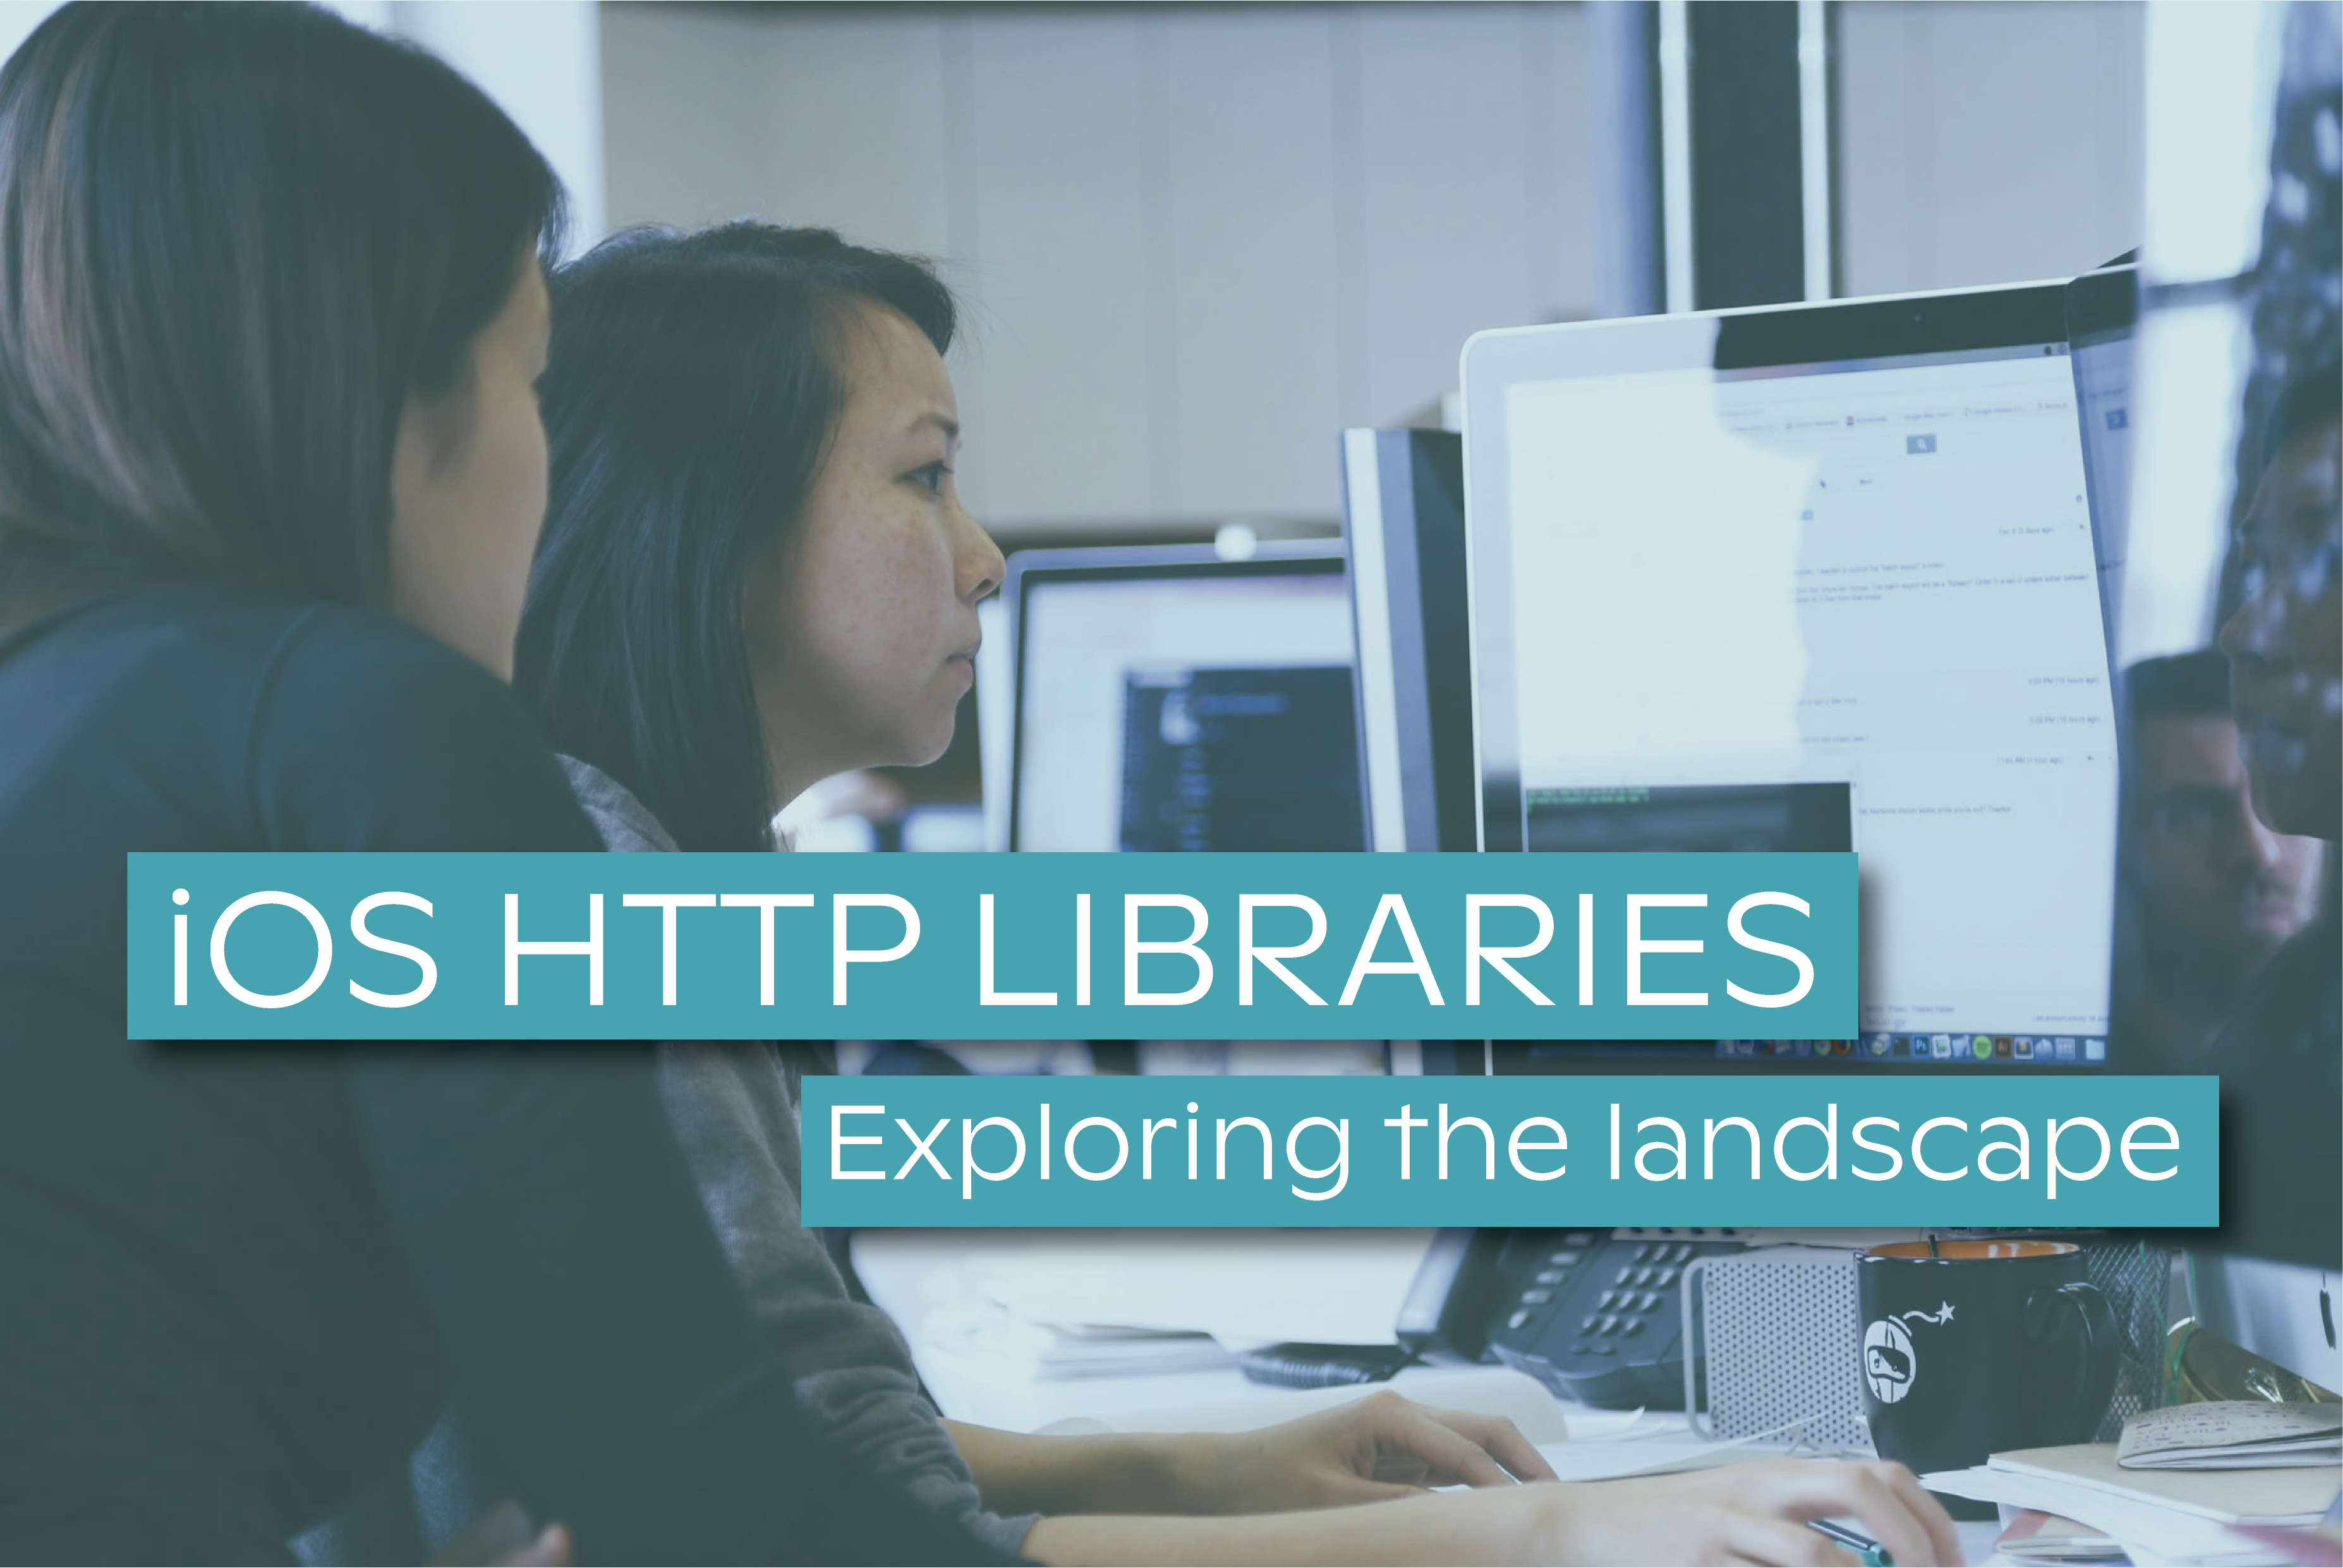 iOS HTTP Libraries: Exploring the landscape